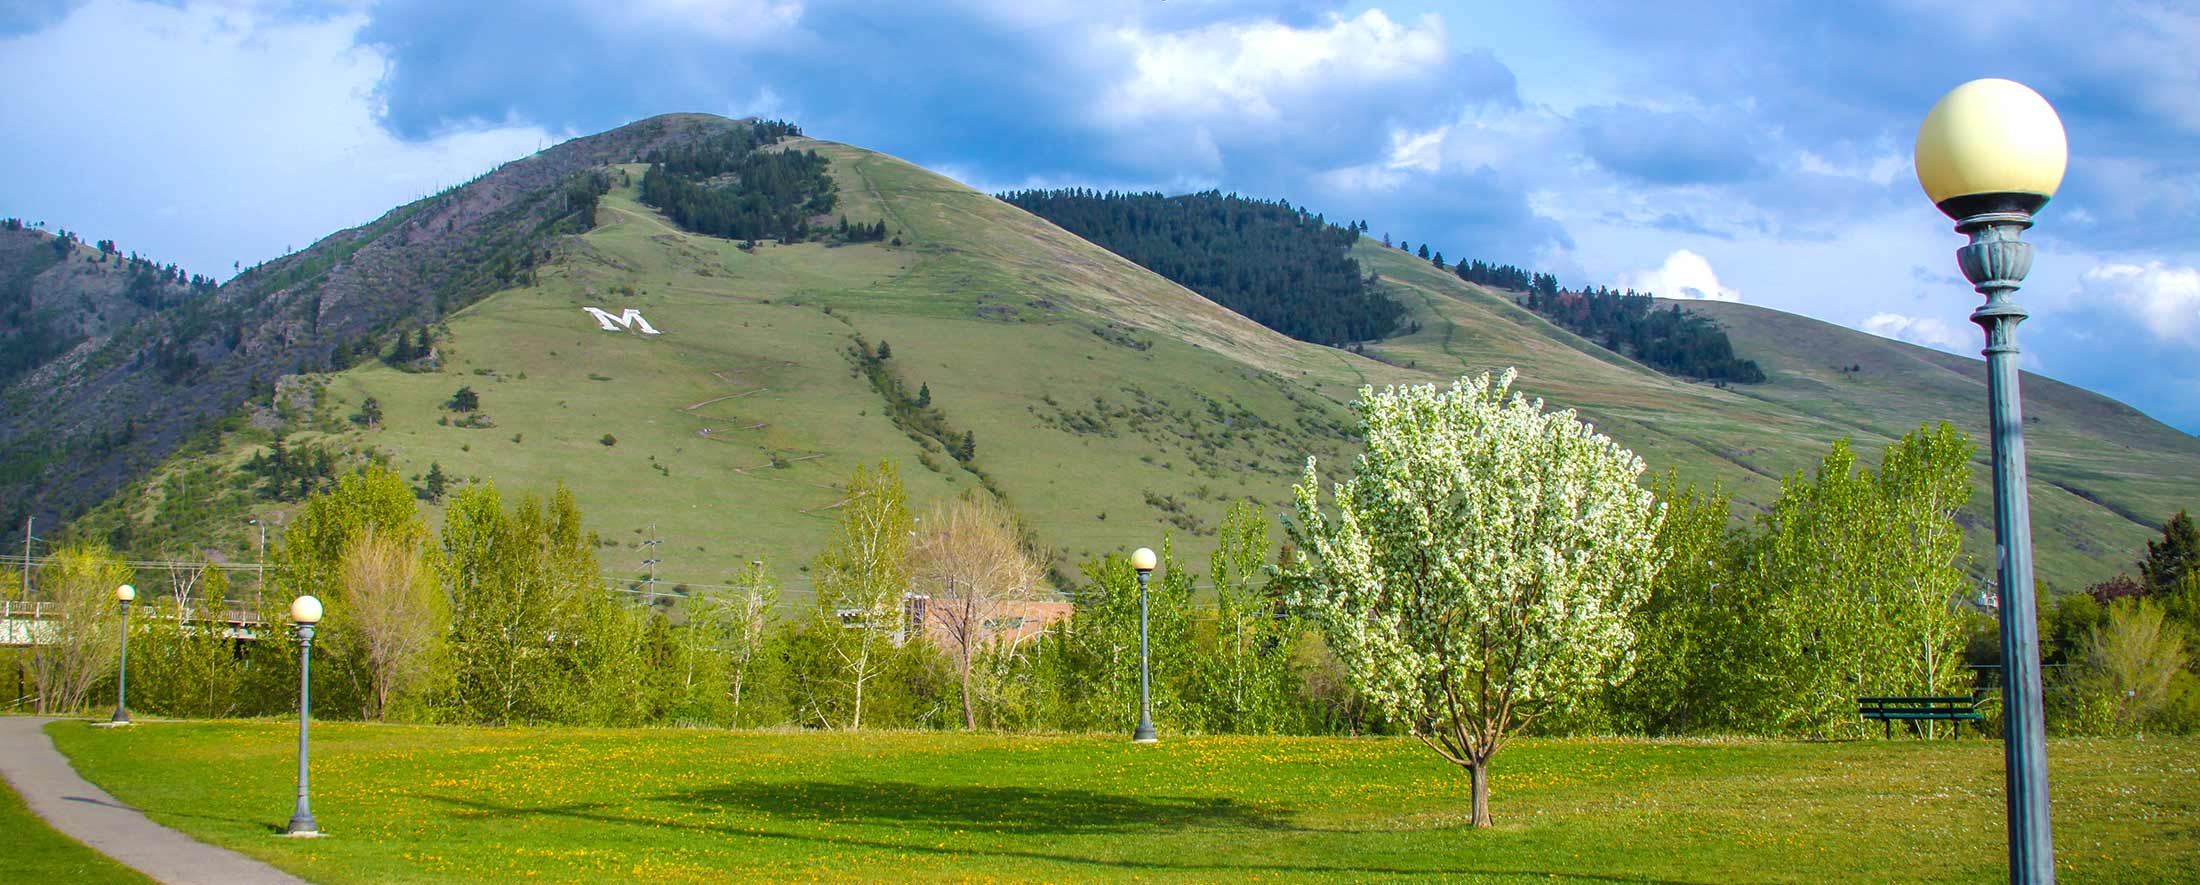 7 Things You'll See in Missoula in the Spring